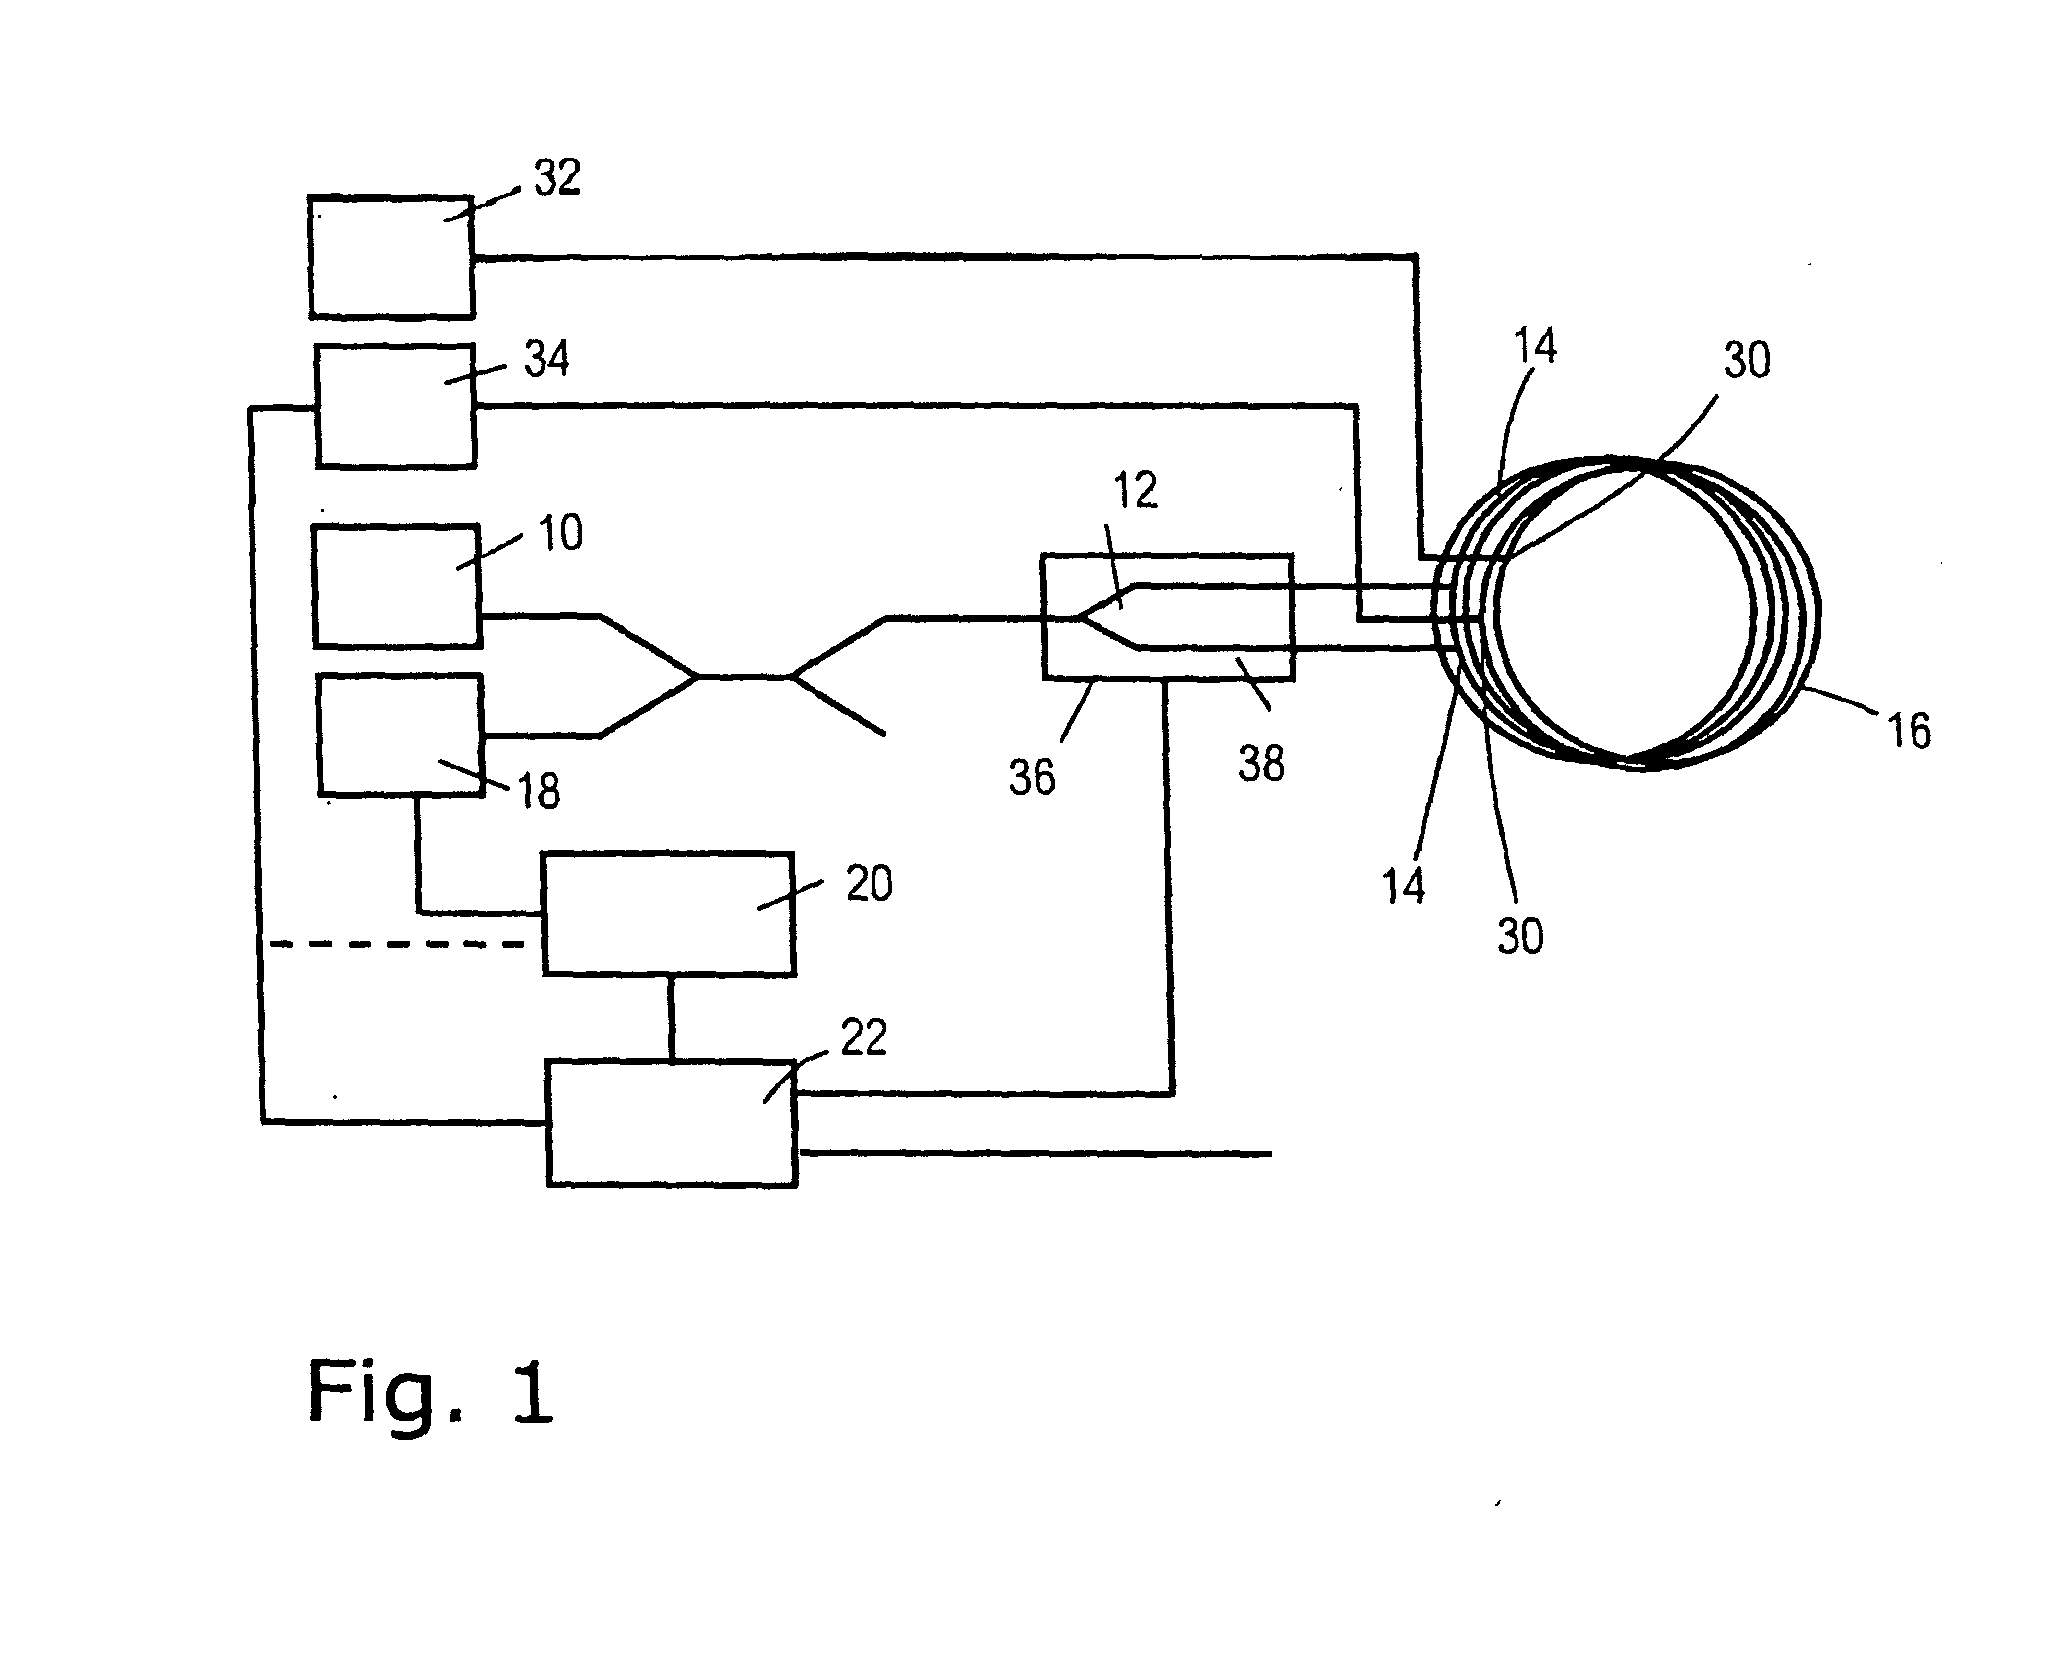 Fiber optic interferometer and method for determining physical state parameters in the interior of a fiber coil of a fiber optic interferometer